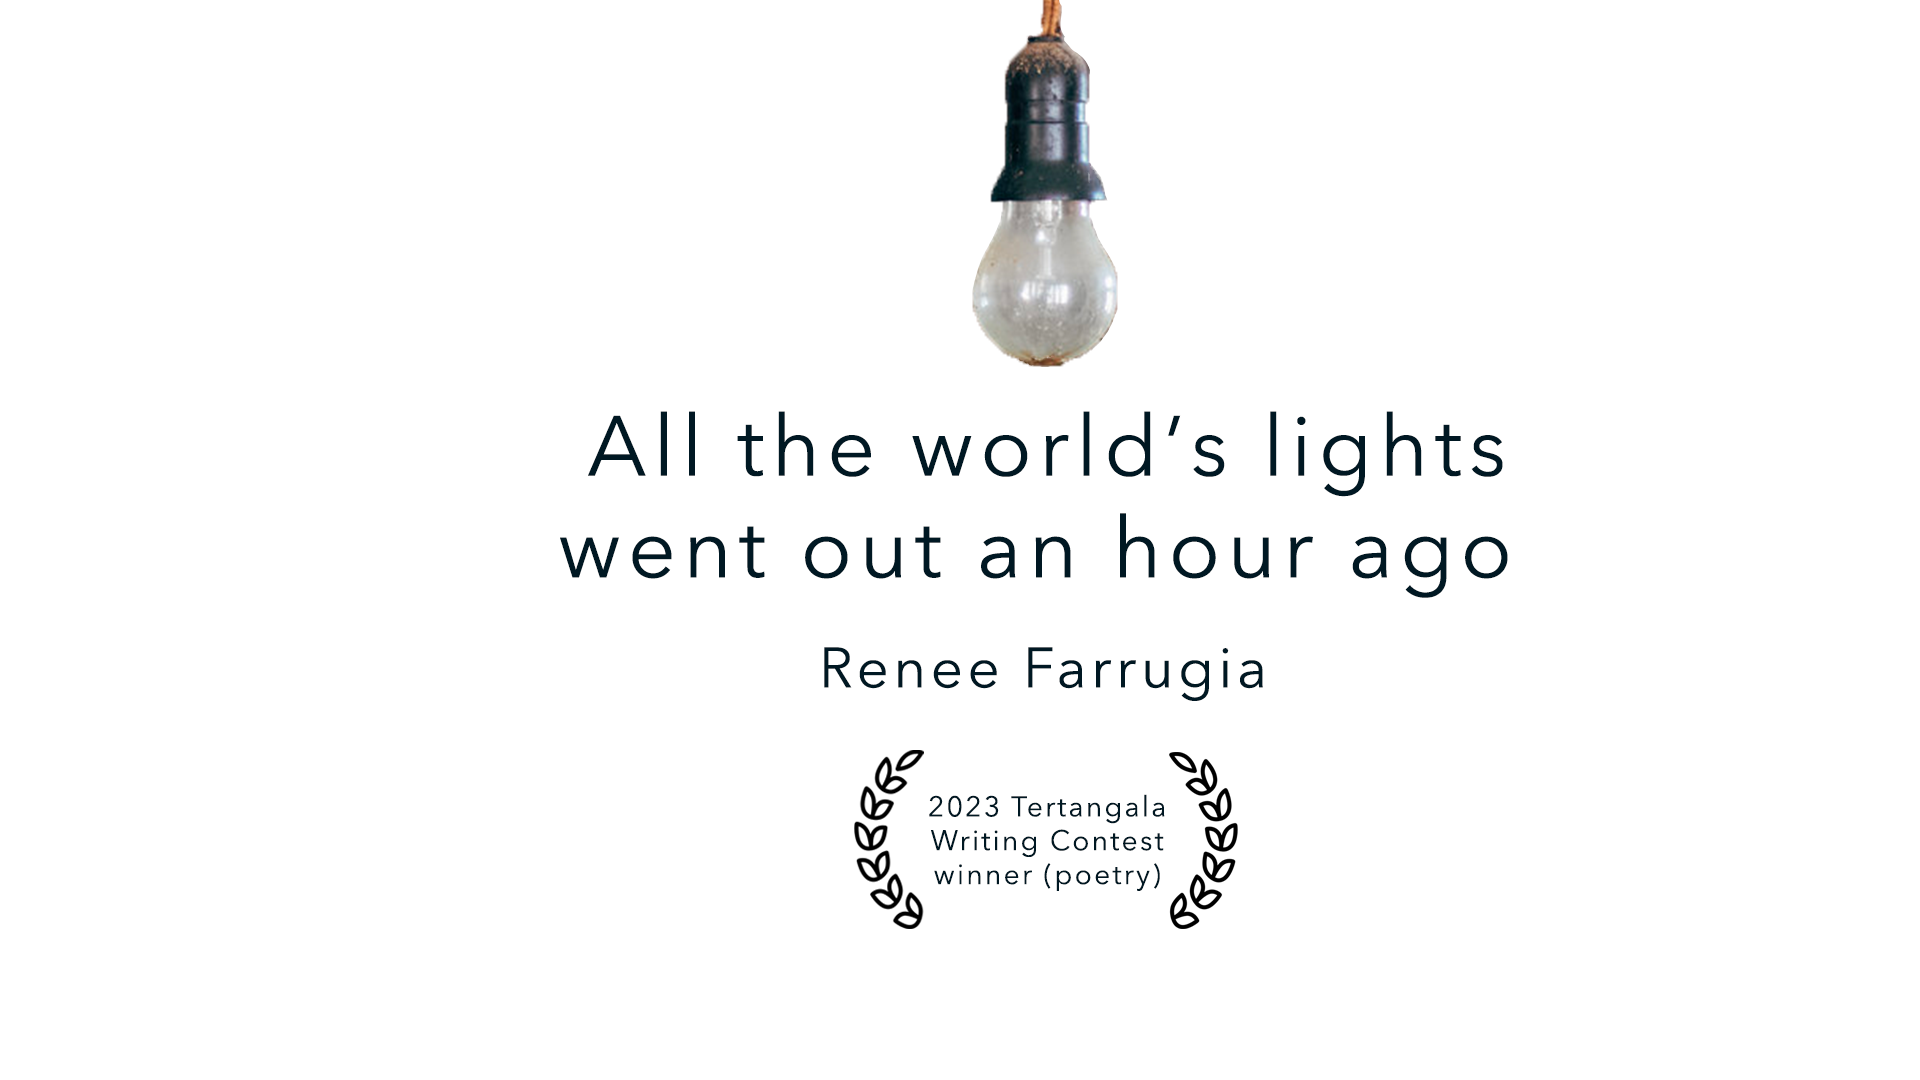 All the world’s lights went out an hour ago – Renee Farrugia